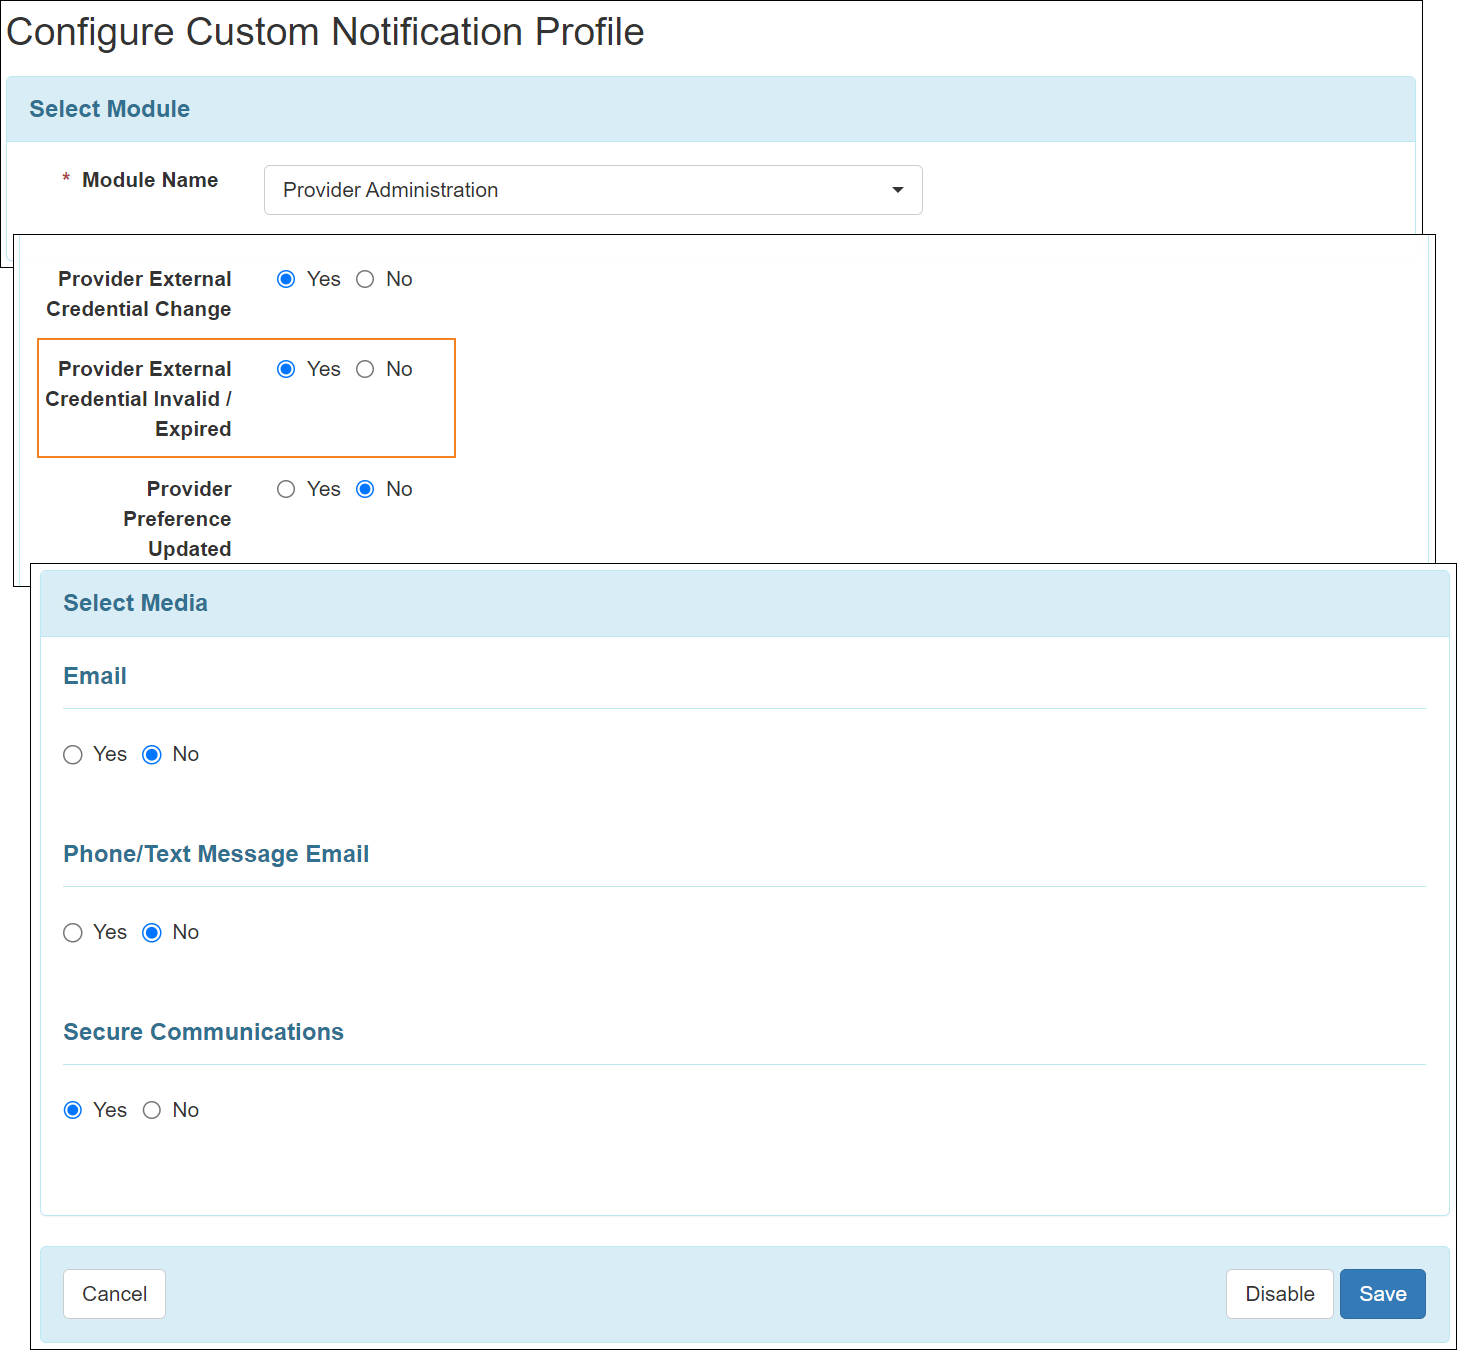 Screenshot showing the newly added field on the Configure Custom Notification Profile